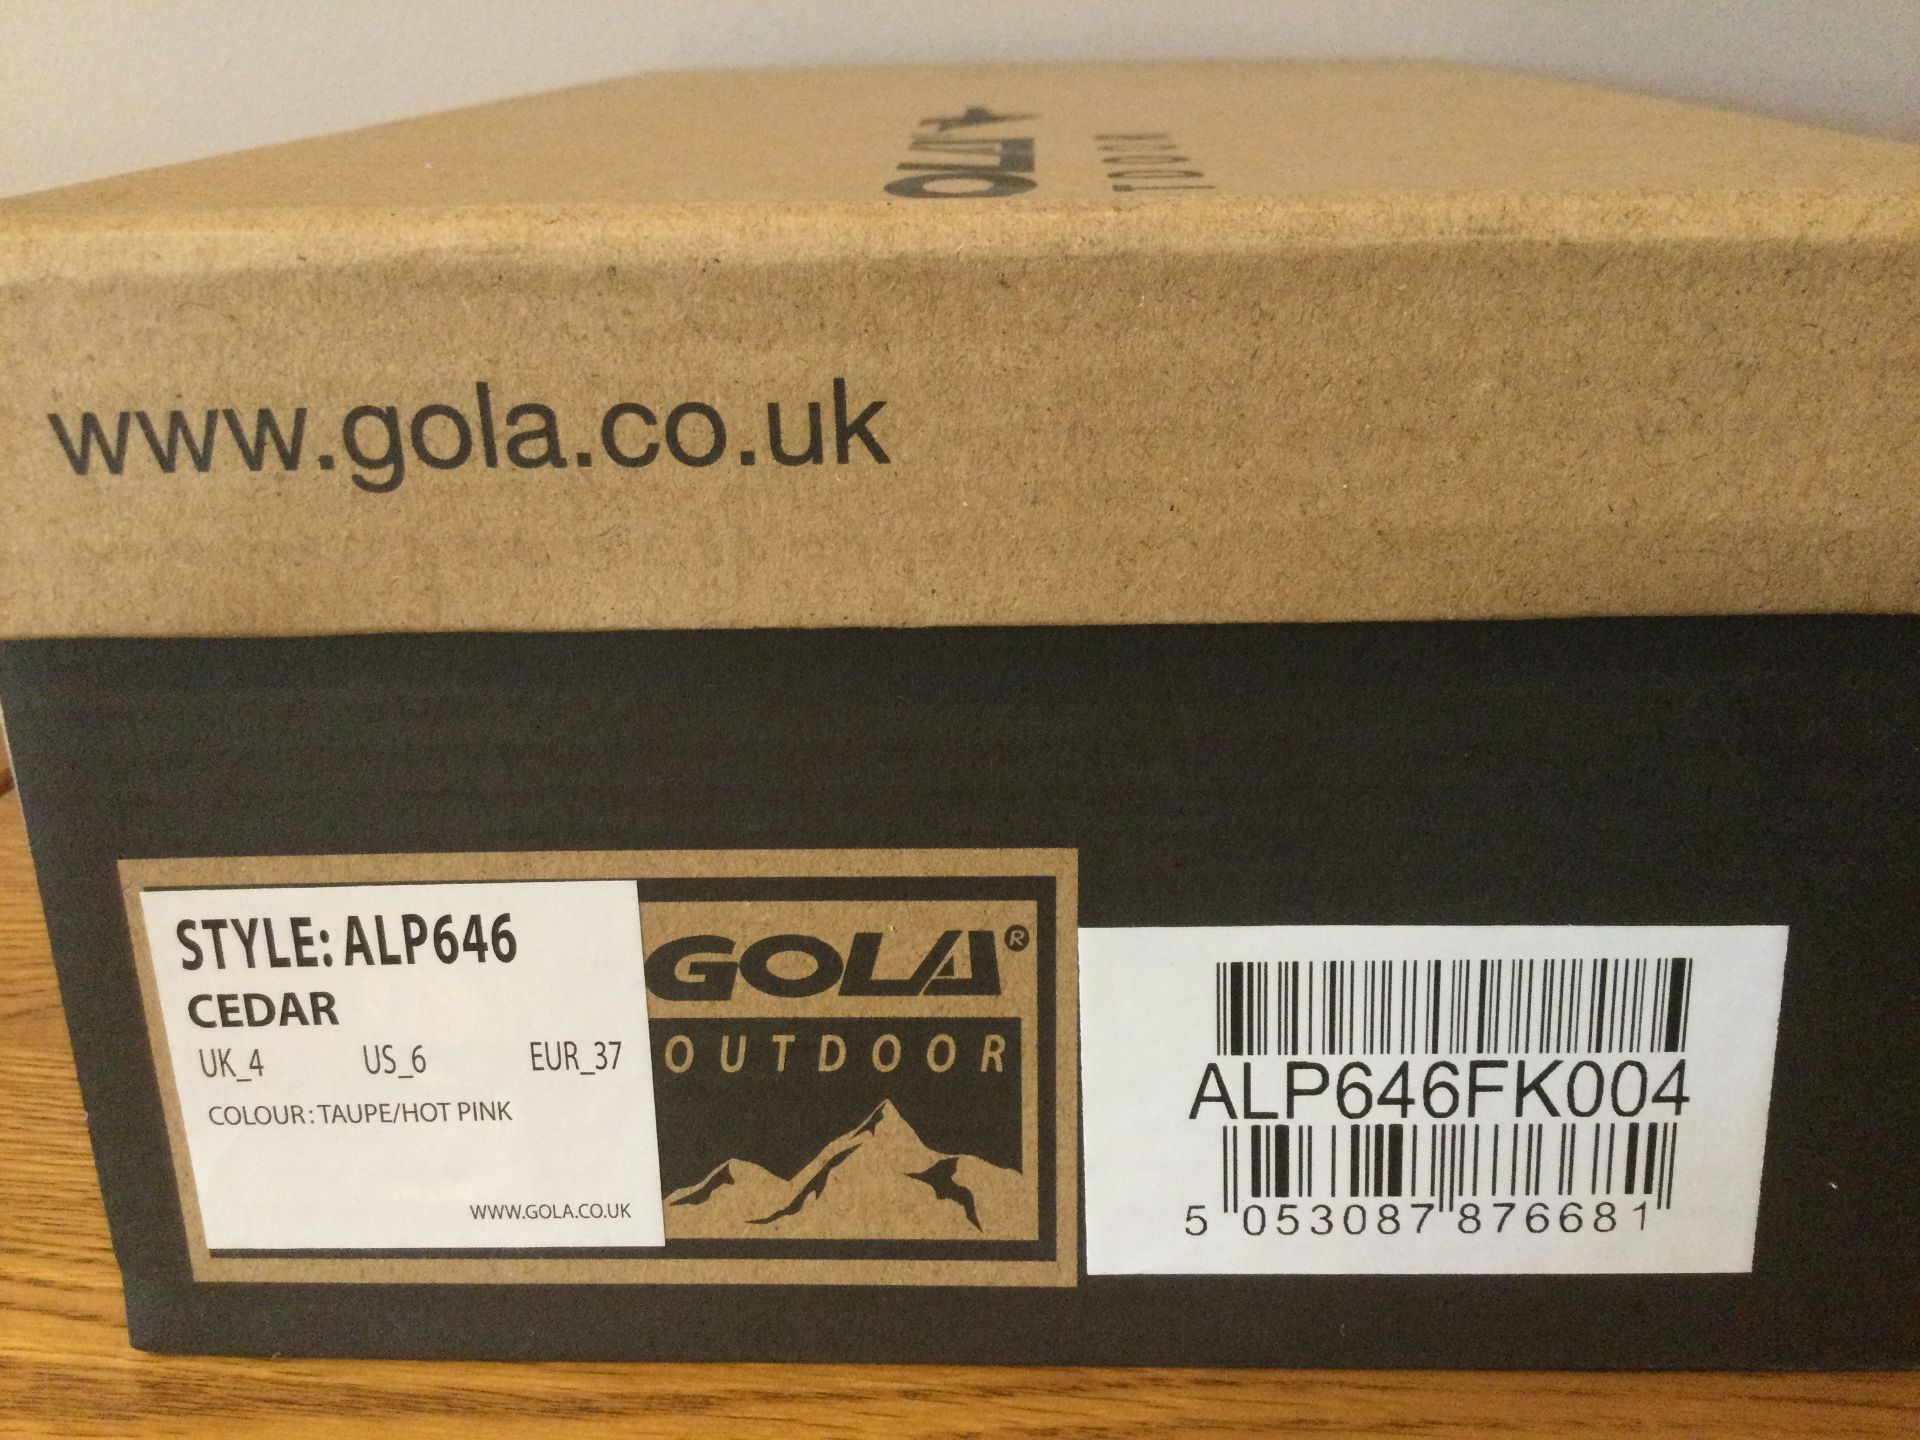 Gola Women's “Cedar” Hiking Sandals, Taupe/Hot Pink, Size 4 - Brand New - Image 4 of 4